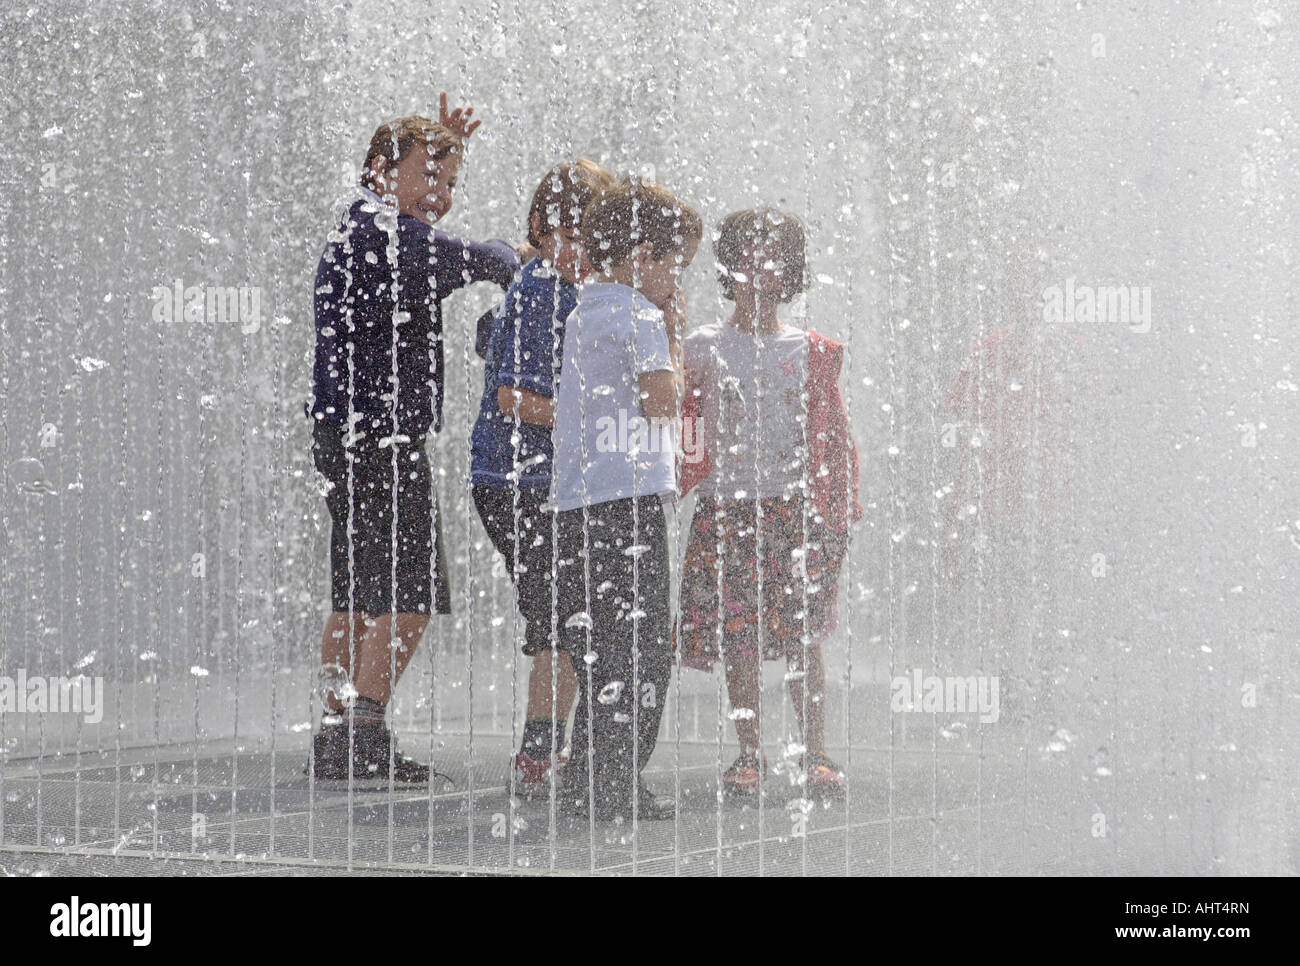 Appearing Rooms. Water sculpture by Jeppe Hein. Royal Festival Hall, South Bank, London, England, UK Stock Photo